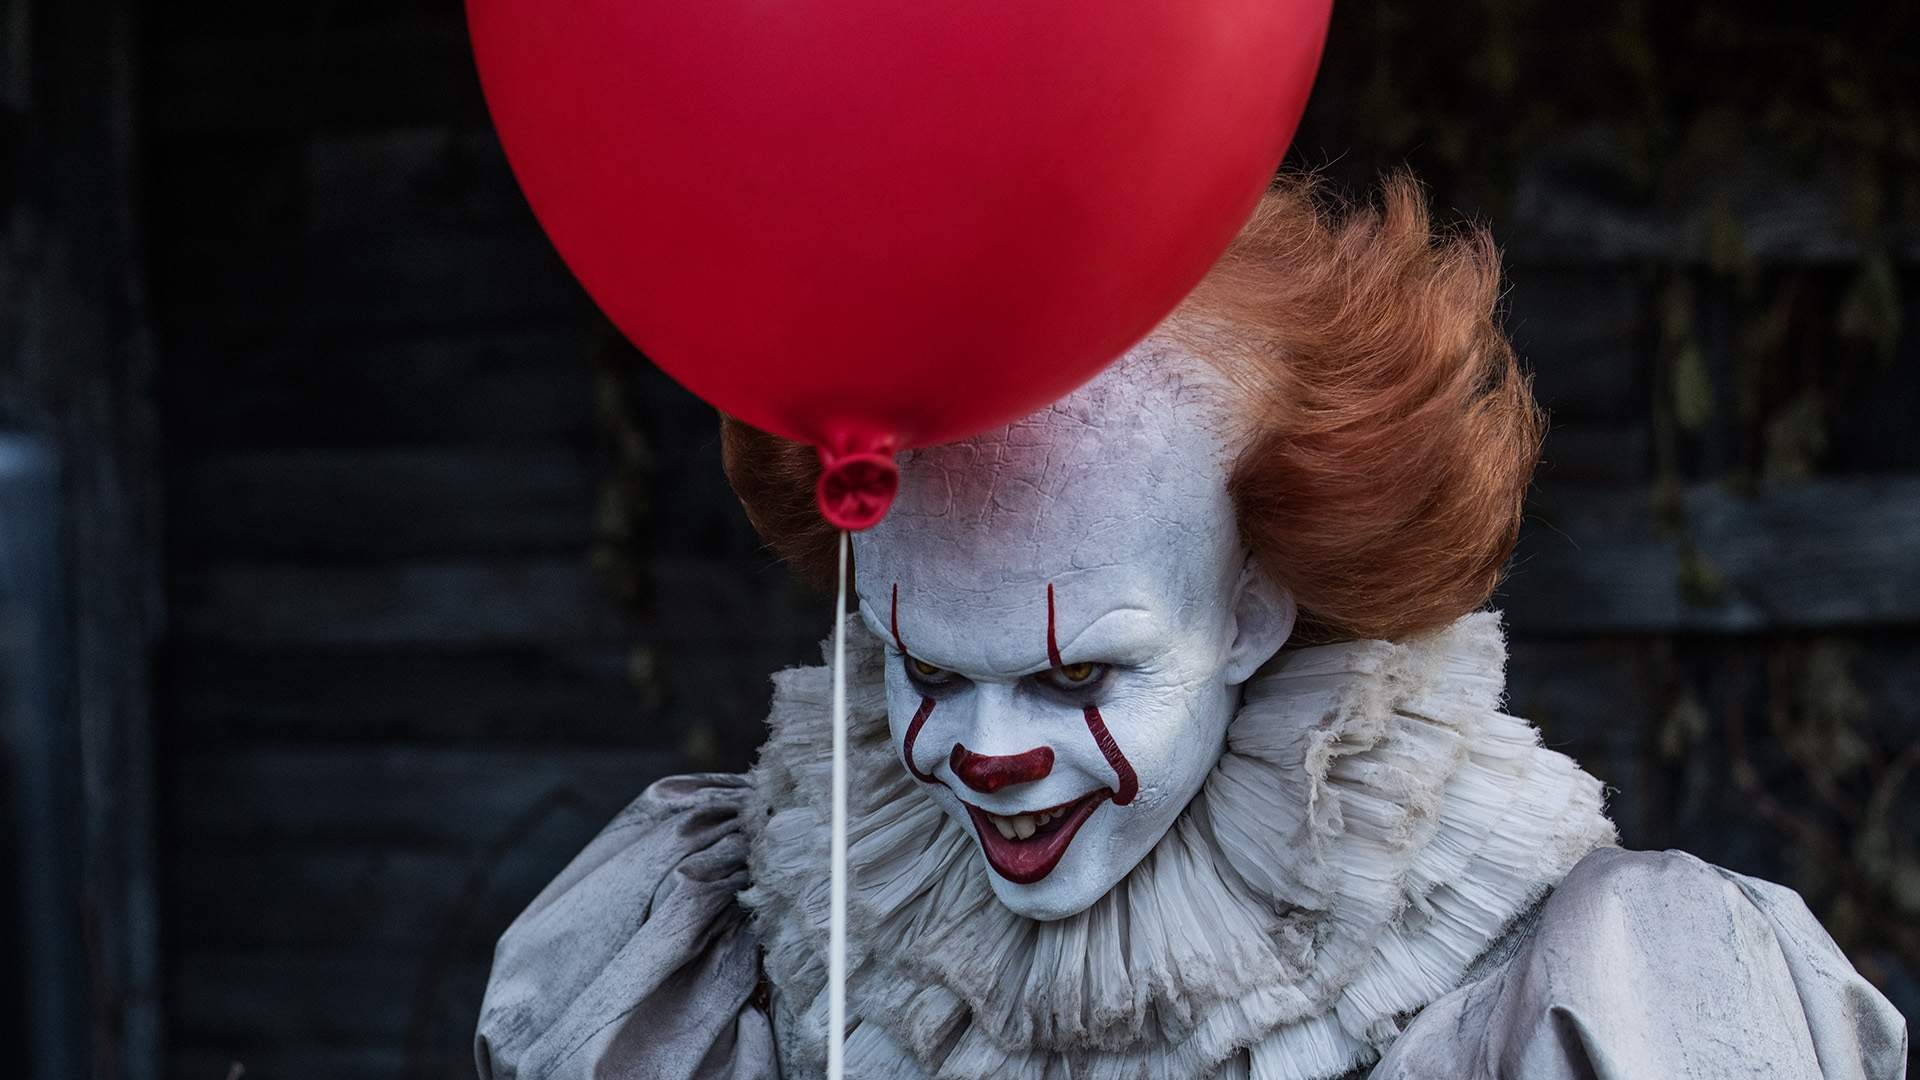 HBO Is Making an 'IT' Prequel Series If You Need More Eerie Red Balloons in Your Streaming Queue